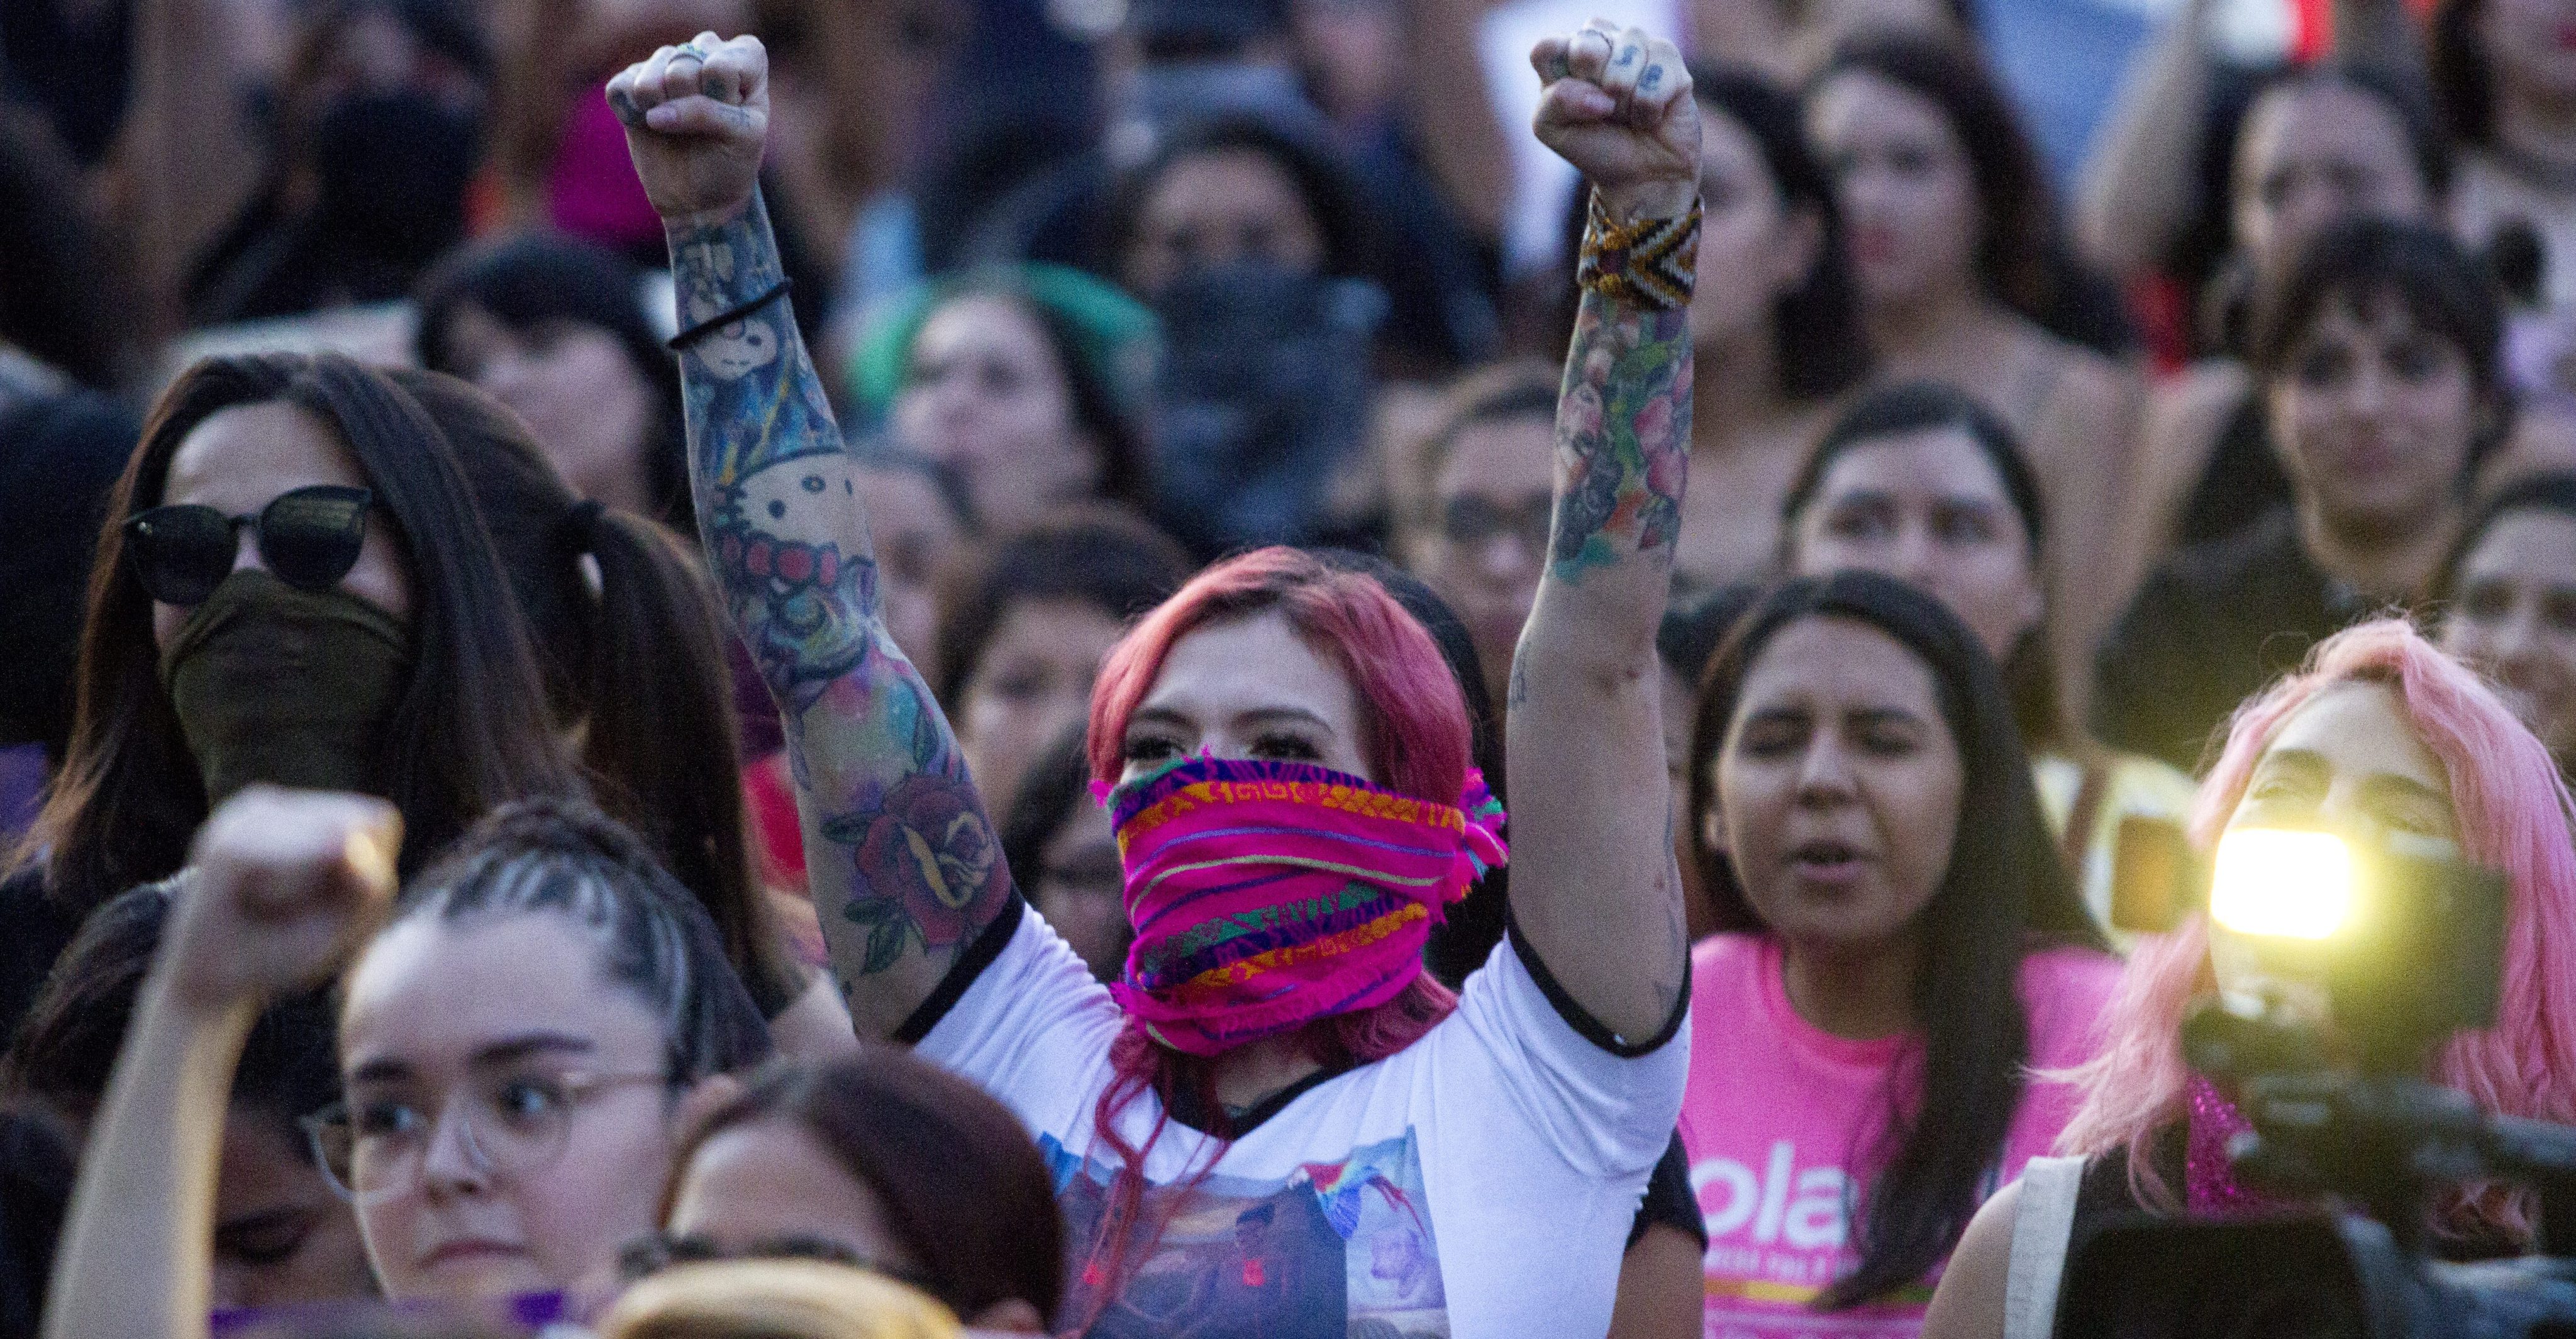 CDMX enlists operational by feminist march; women ask for no cops